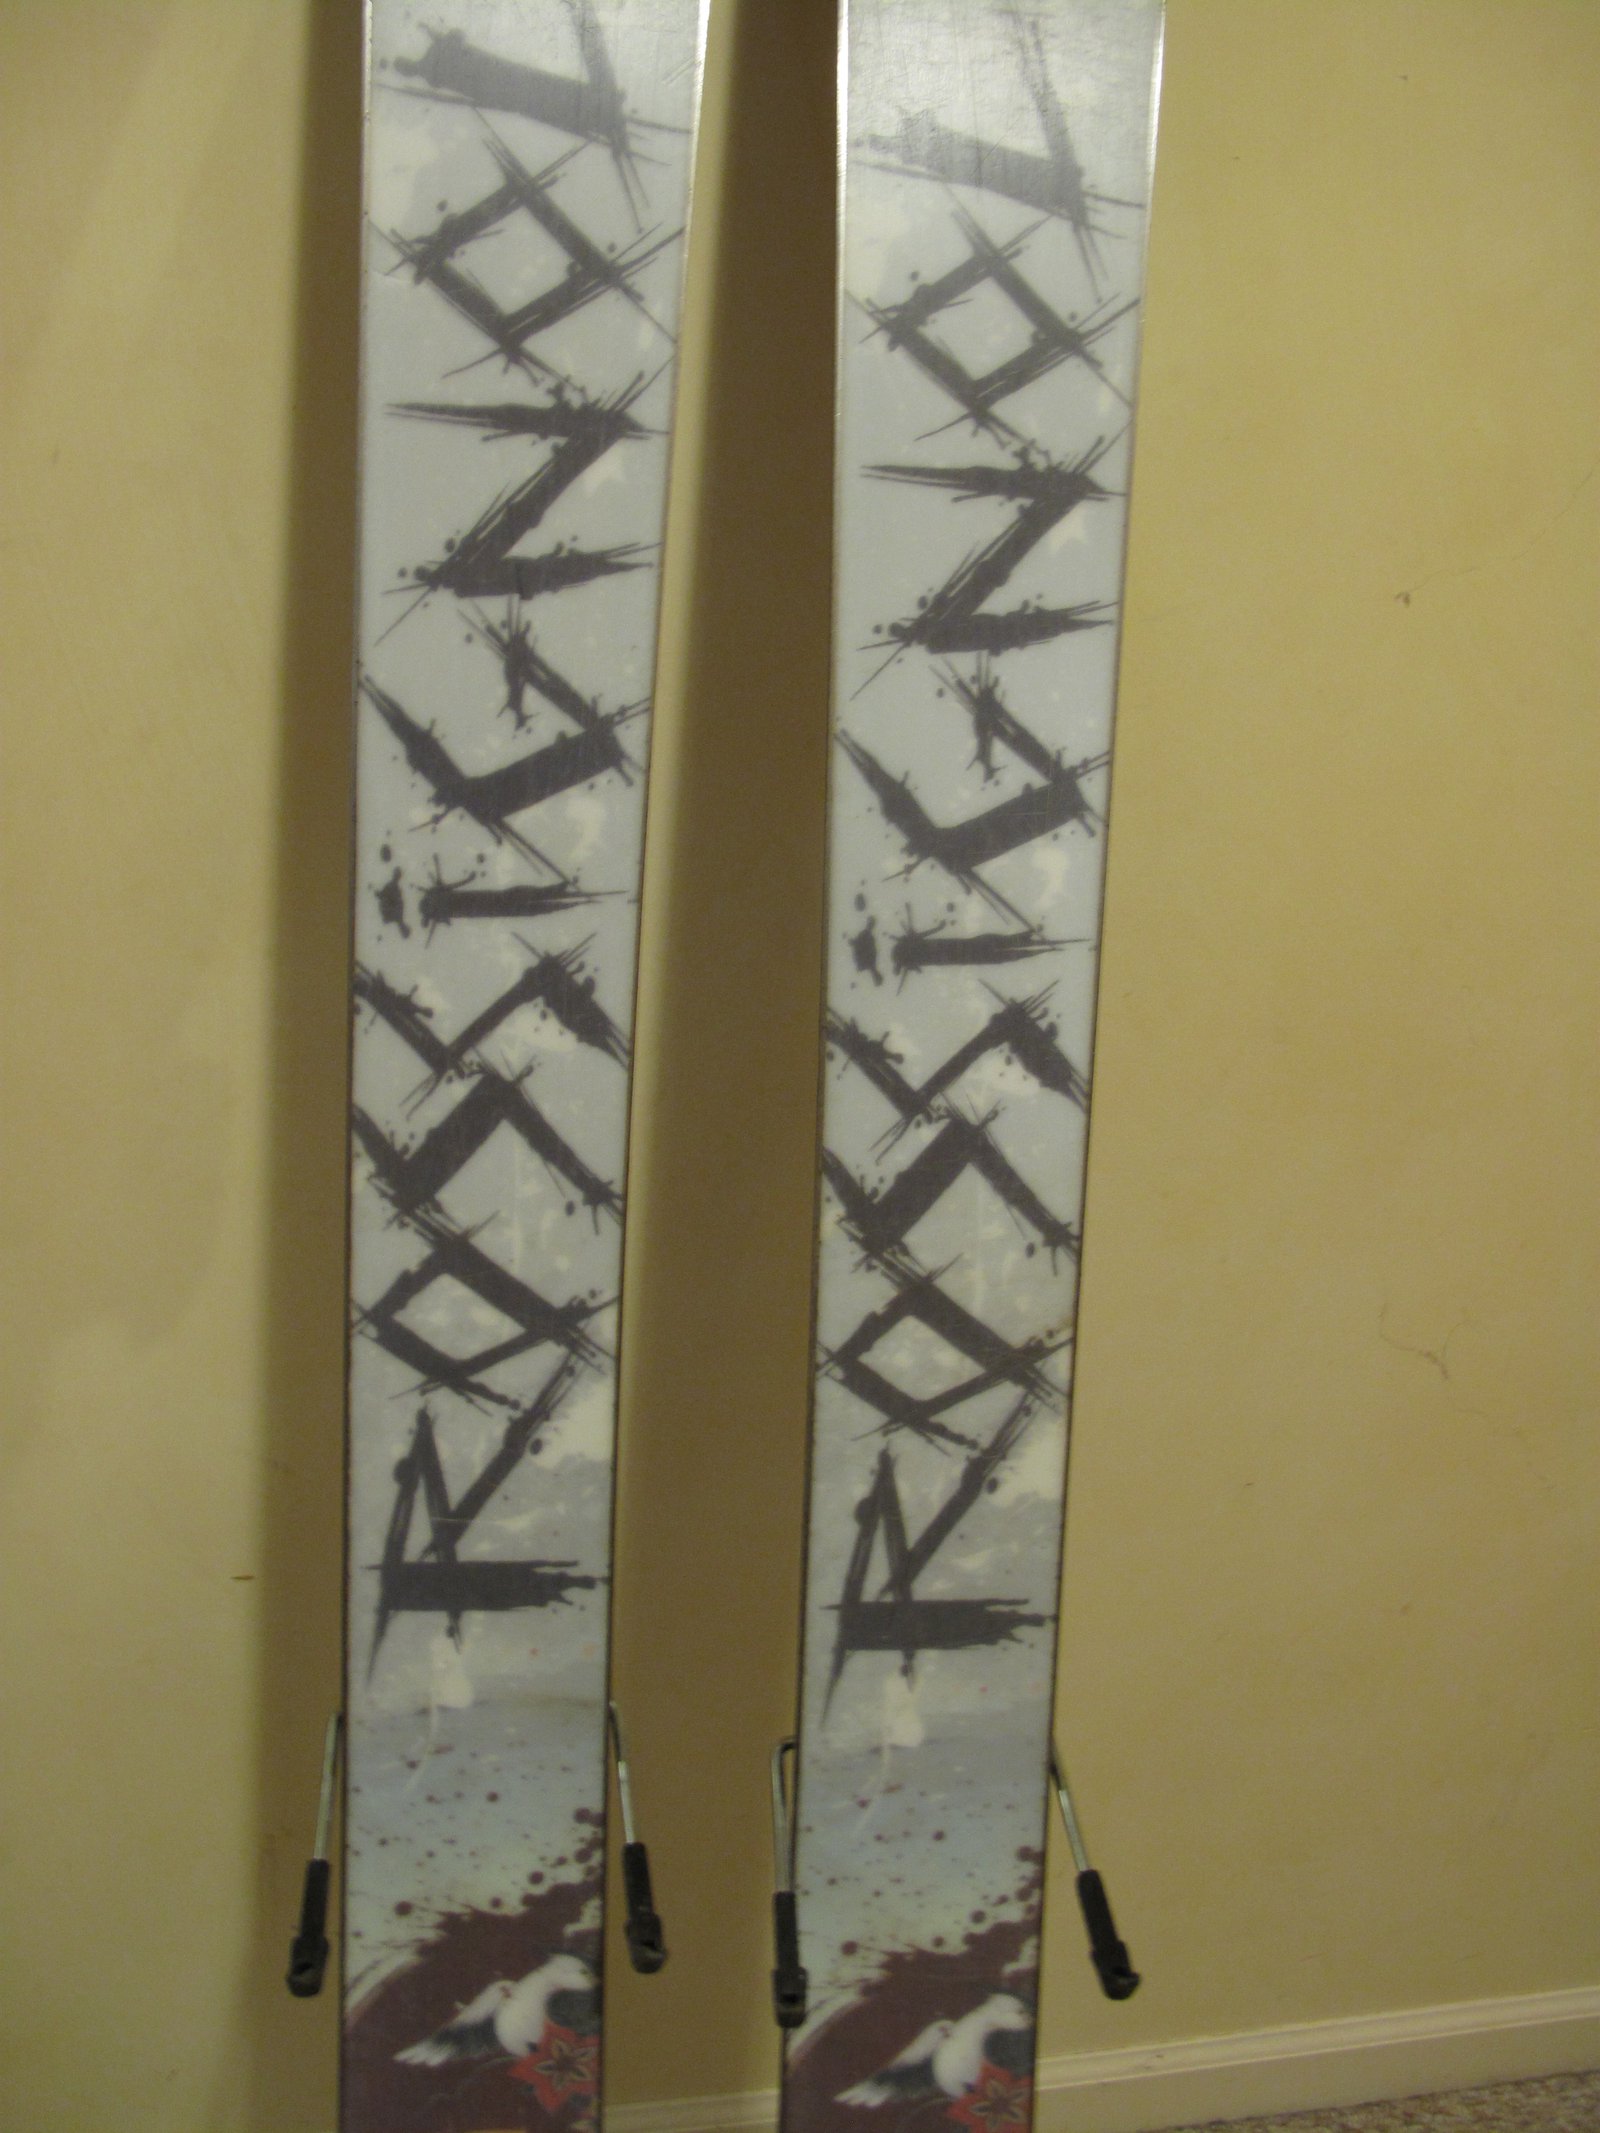 Rossignol S3 for sale pic #2